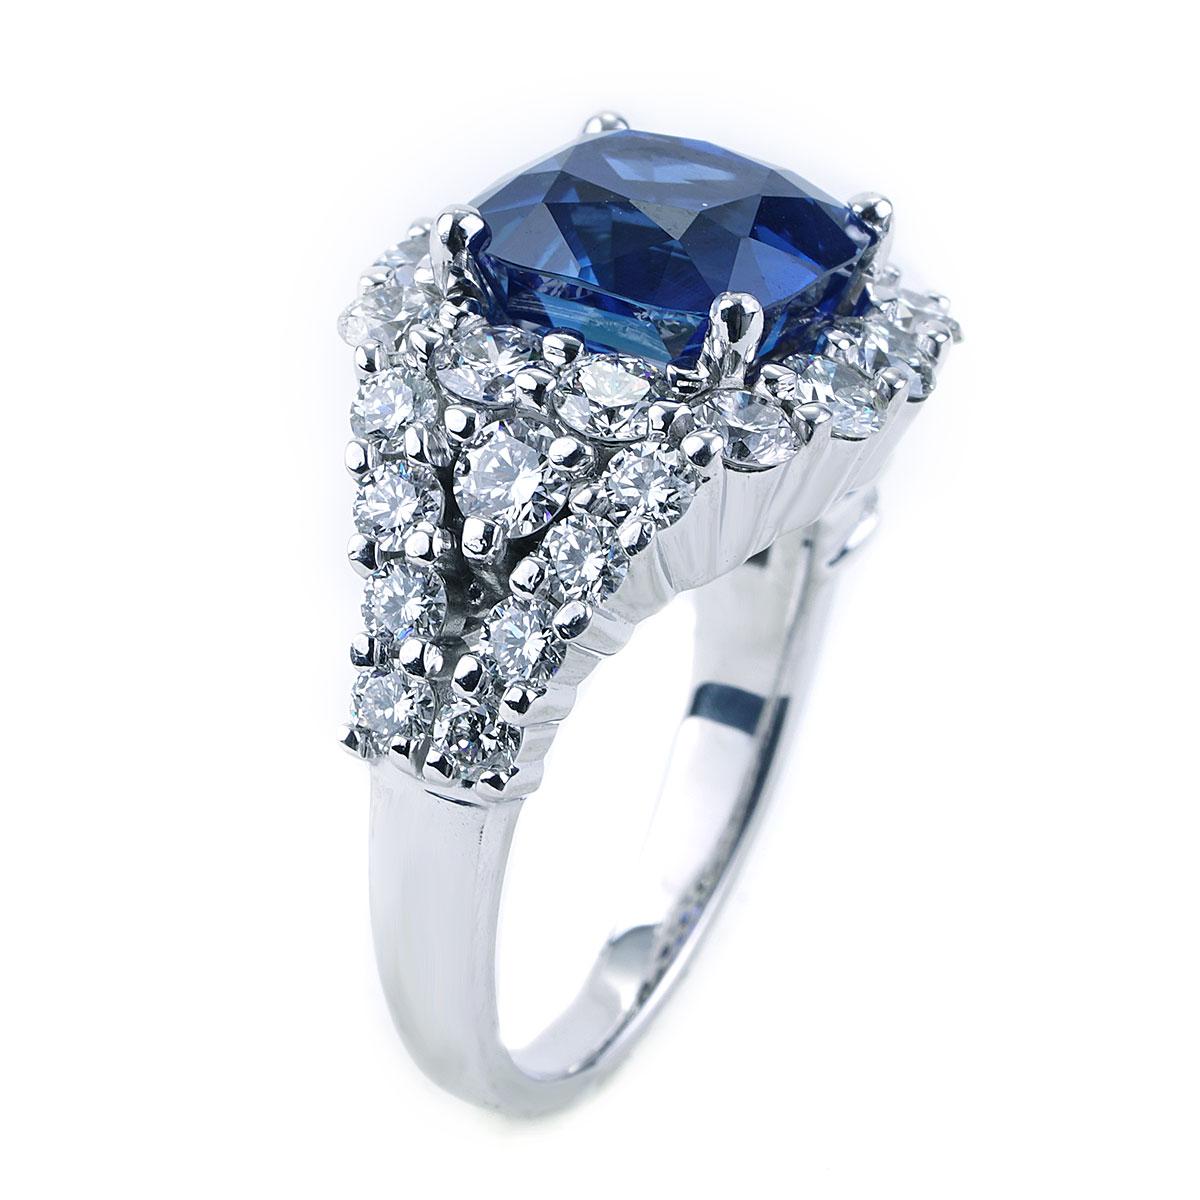 Introducing a truly exquisite masterpiece of jewelry, this stunning ring boasts an unheated, GIA certified, 5.42 carat blue sapphire of pure Sri Lankan origin as its centerpiece. This captivating gemstone, cut into a luxurious cushion shape,